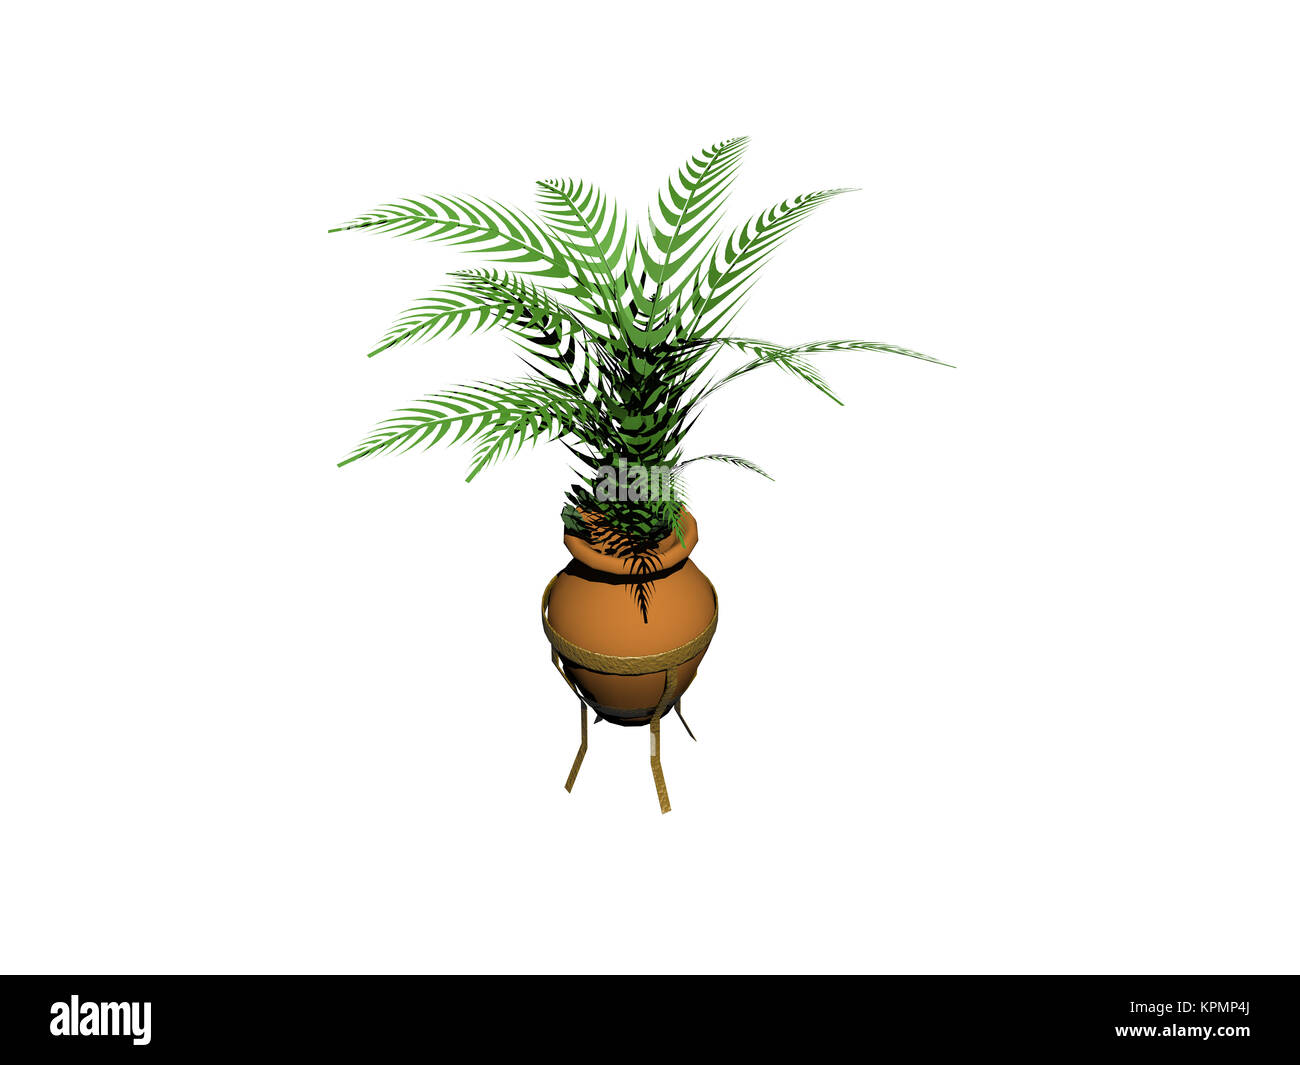 vase with palm fronds Stock Photo